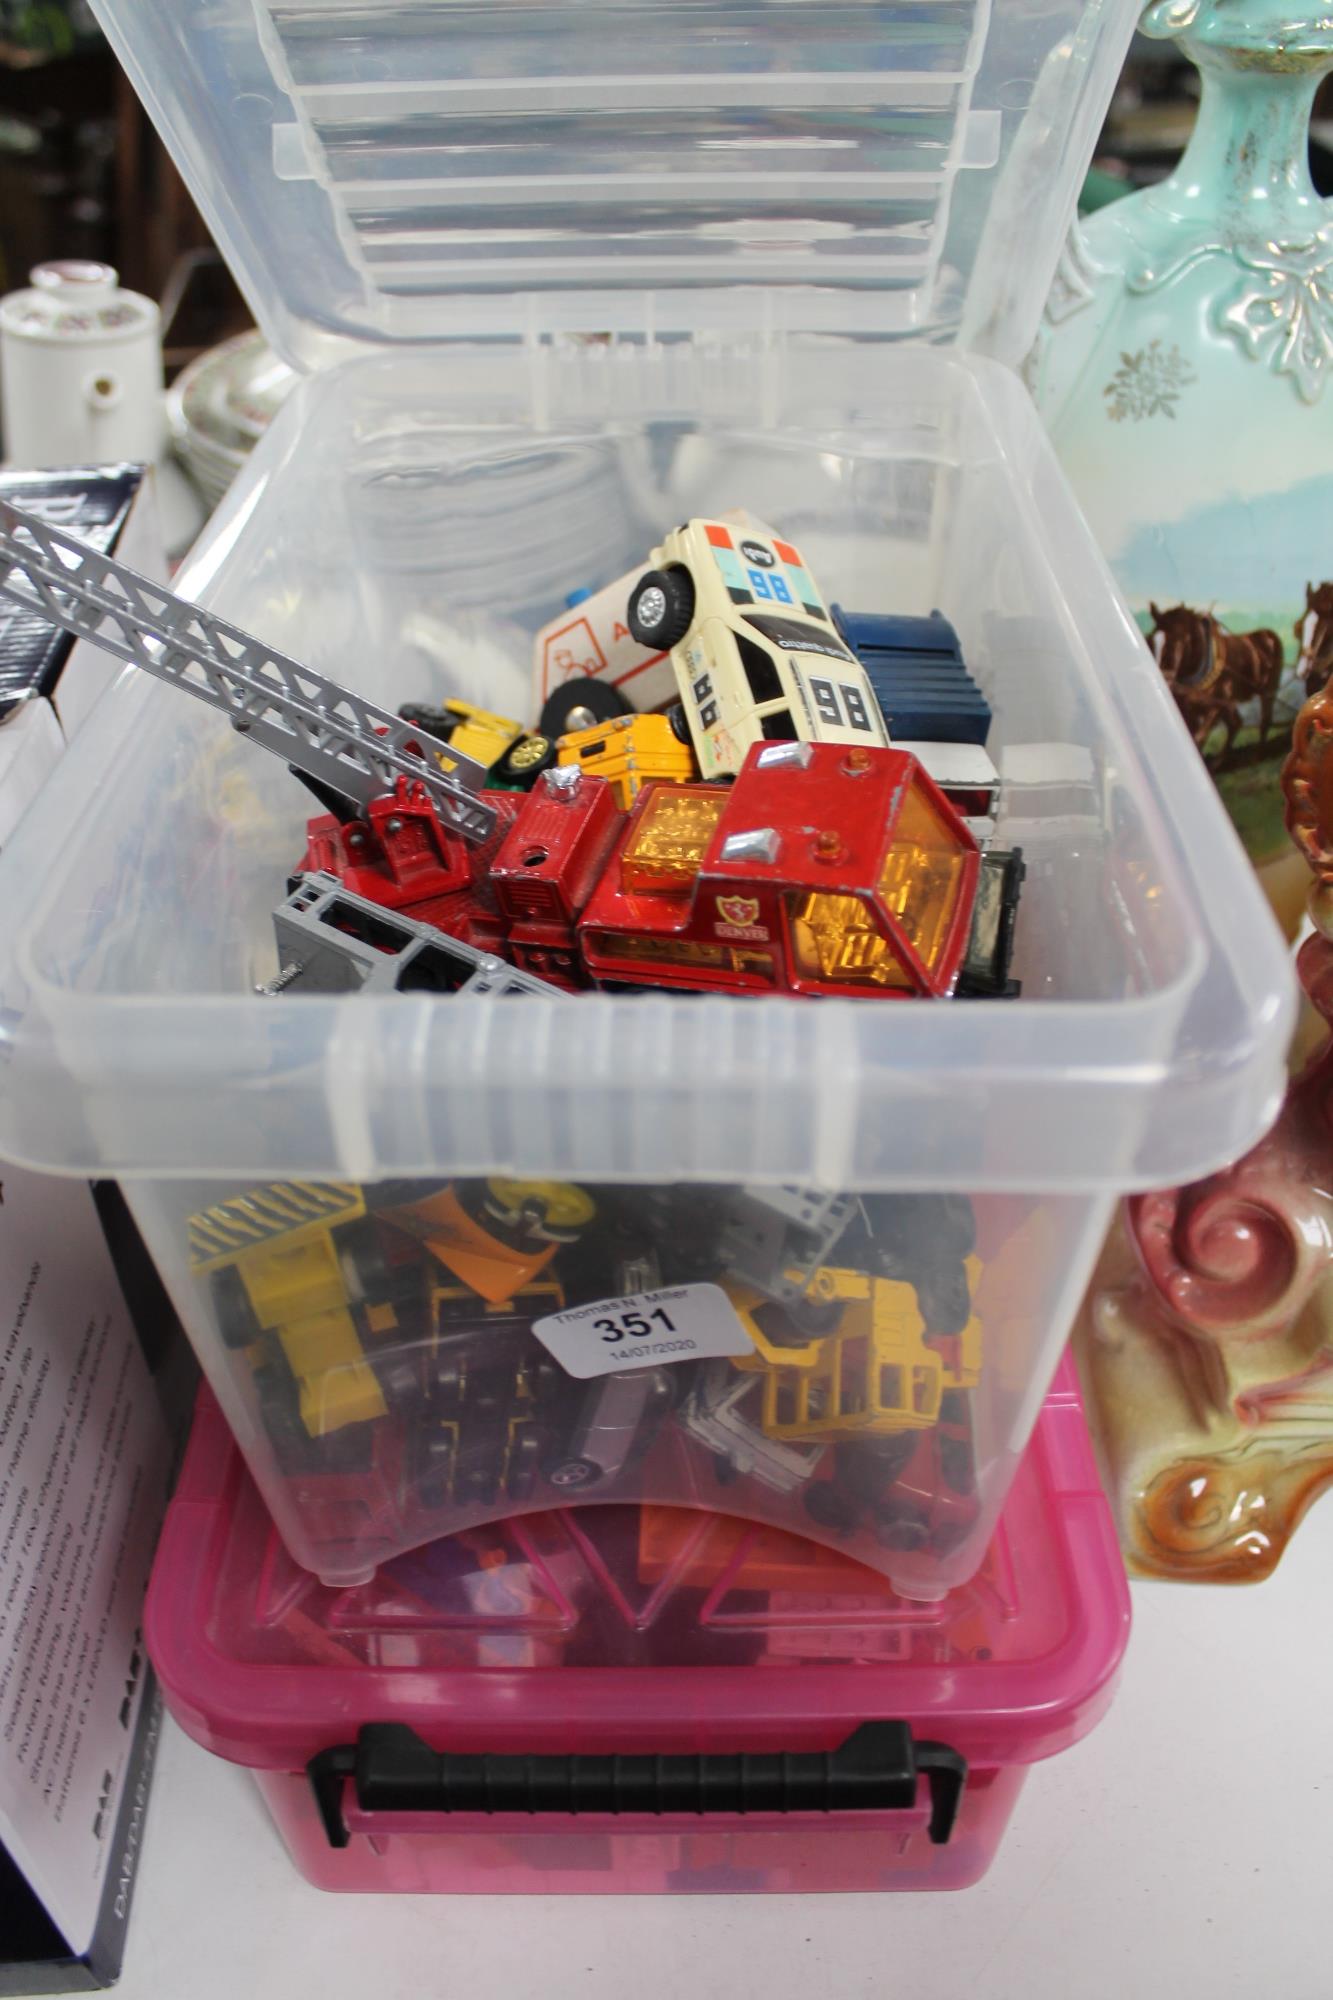 A crate of die cast vehicles and a box of lego